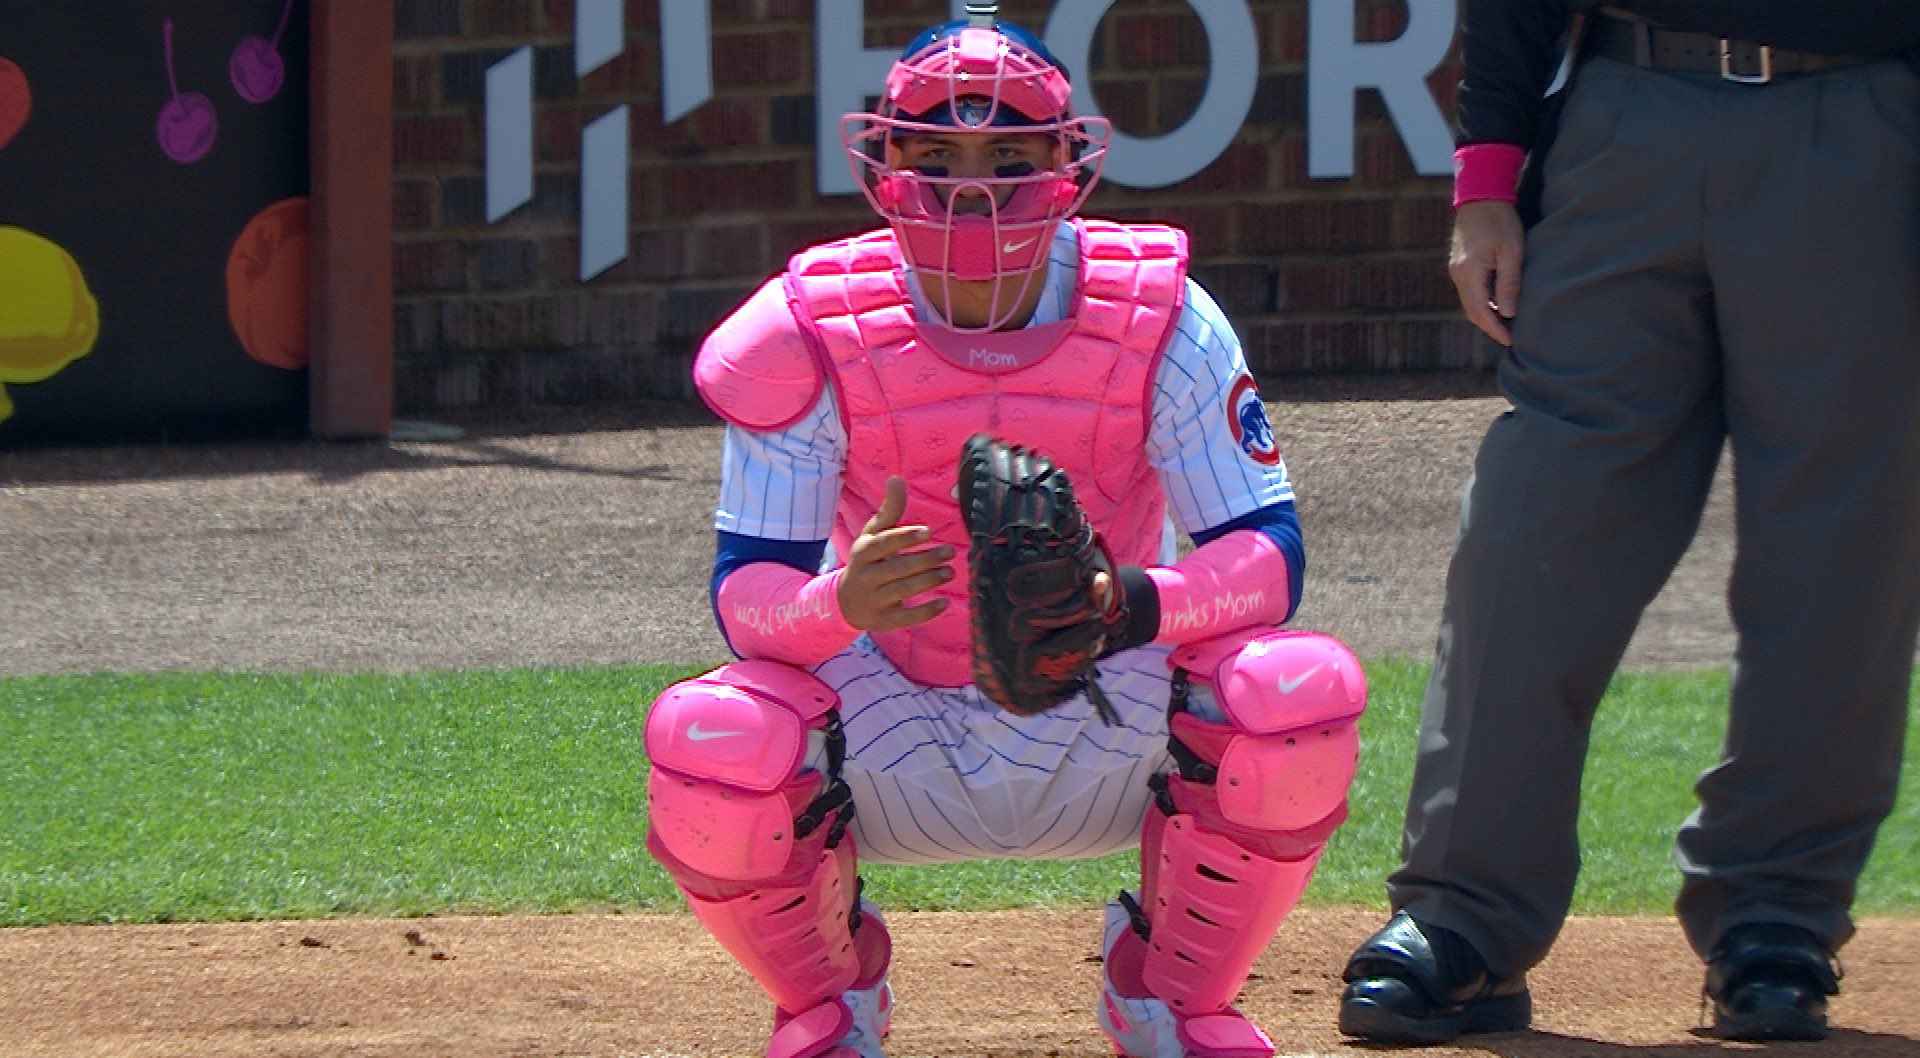 Stadium on X: Willson Contreras' gear for Mother's Day >>